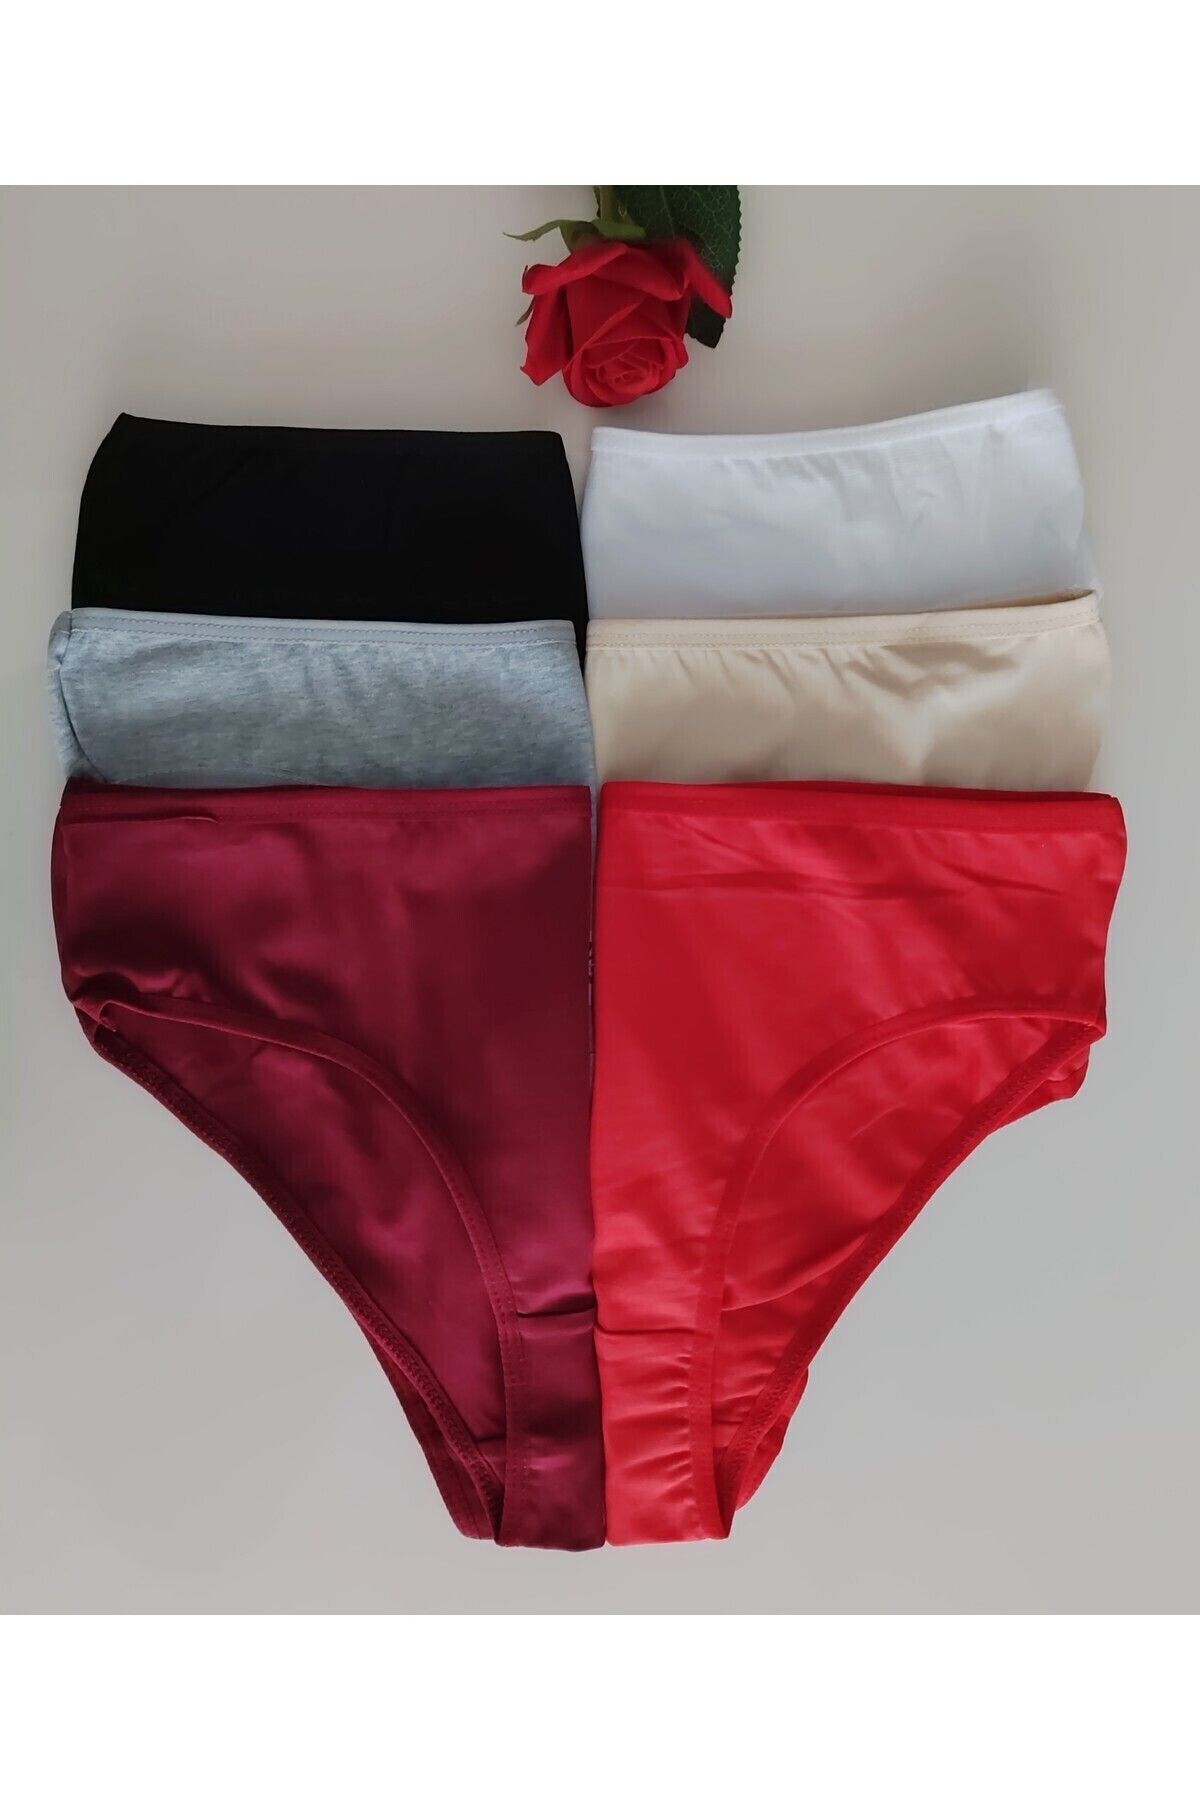 Littledesire Daily Wear Cotton Panties (2 Pcs), Lingerie, Panties Free  Delivery India.